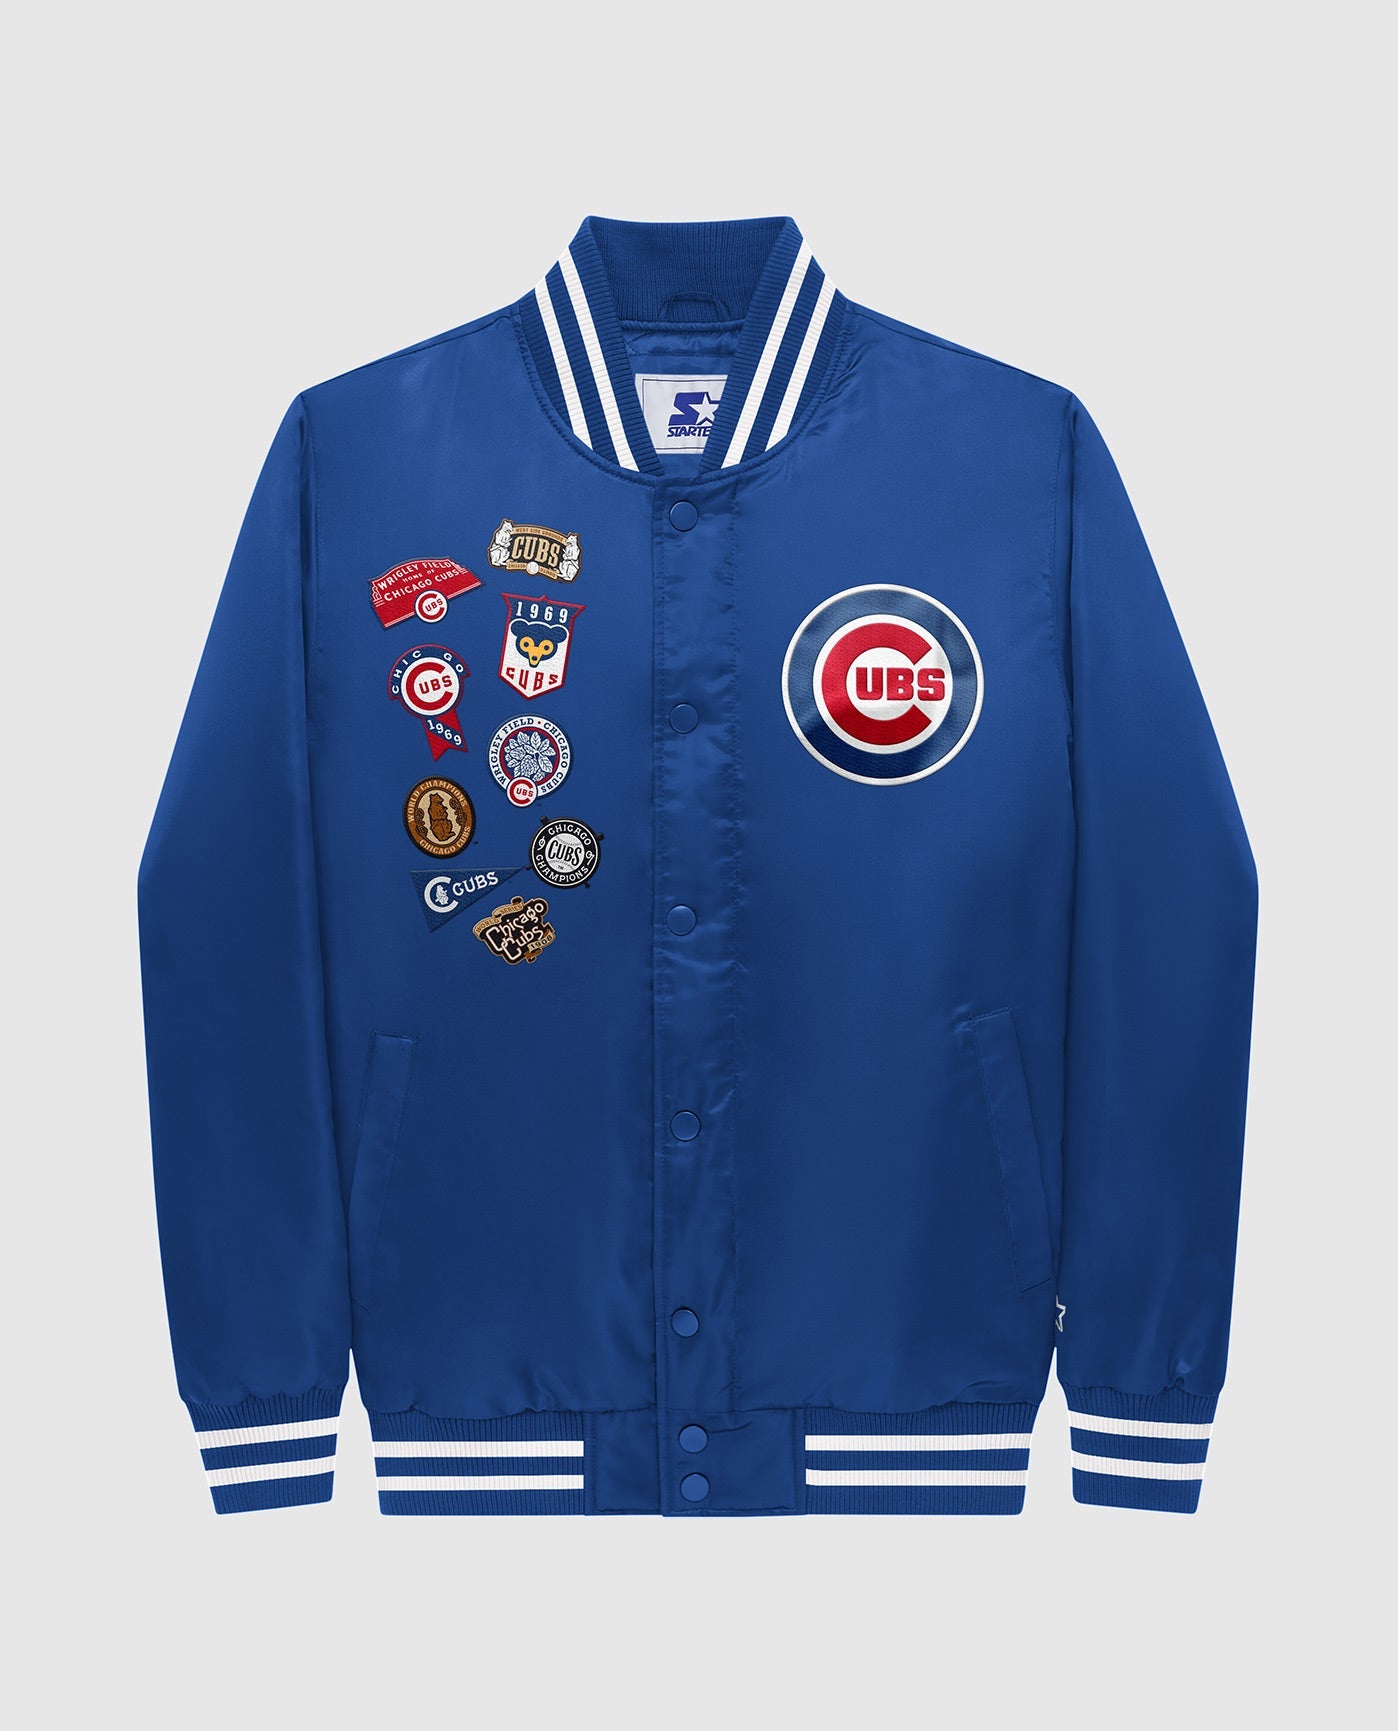 Chicago Cubs Jackets, Cubs Vests, Cubs Full Zip Jackets